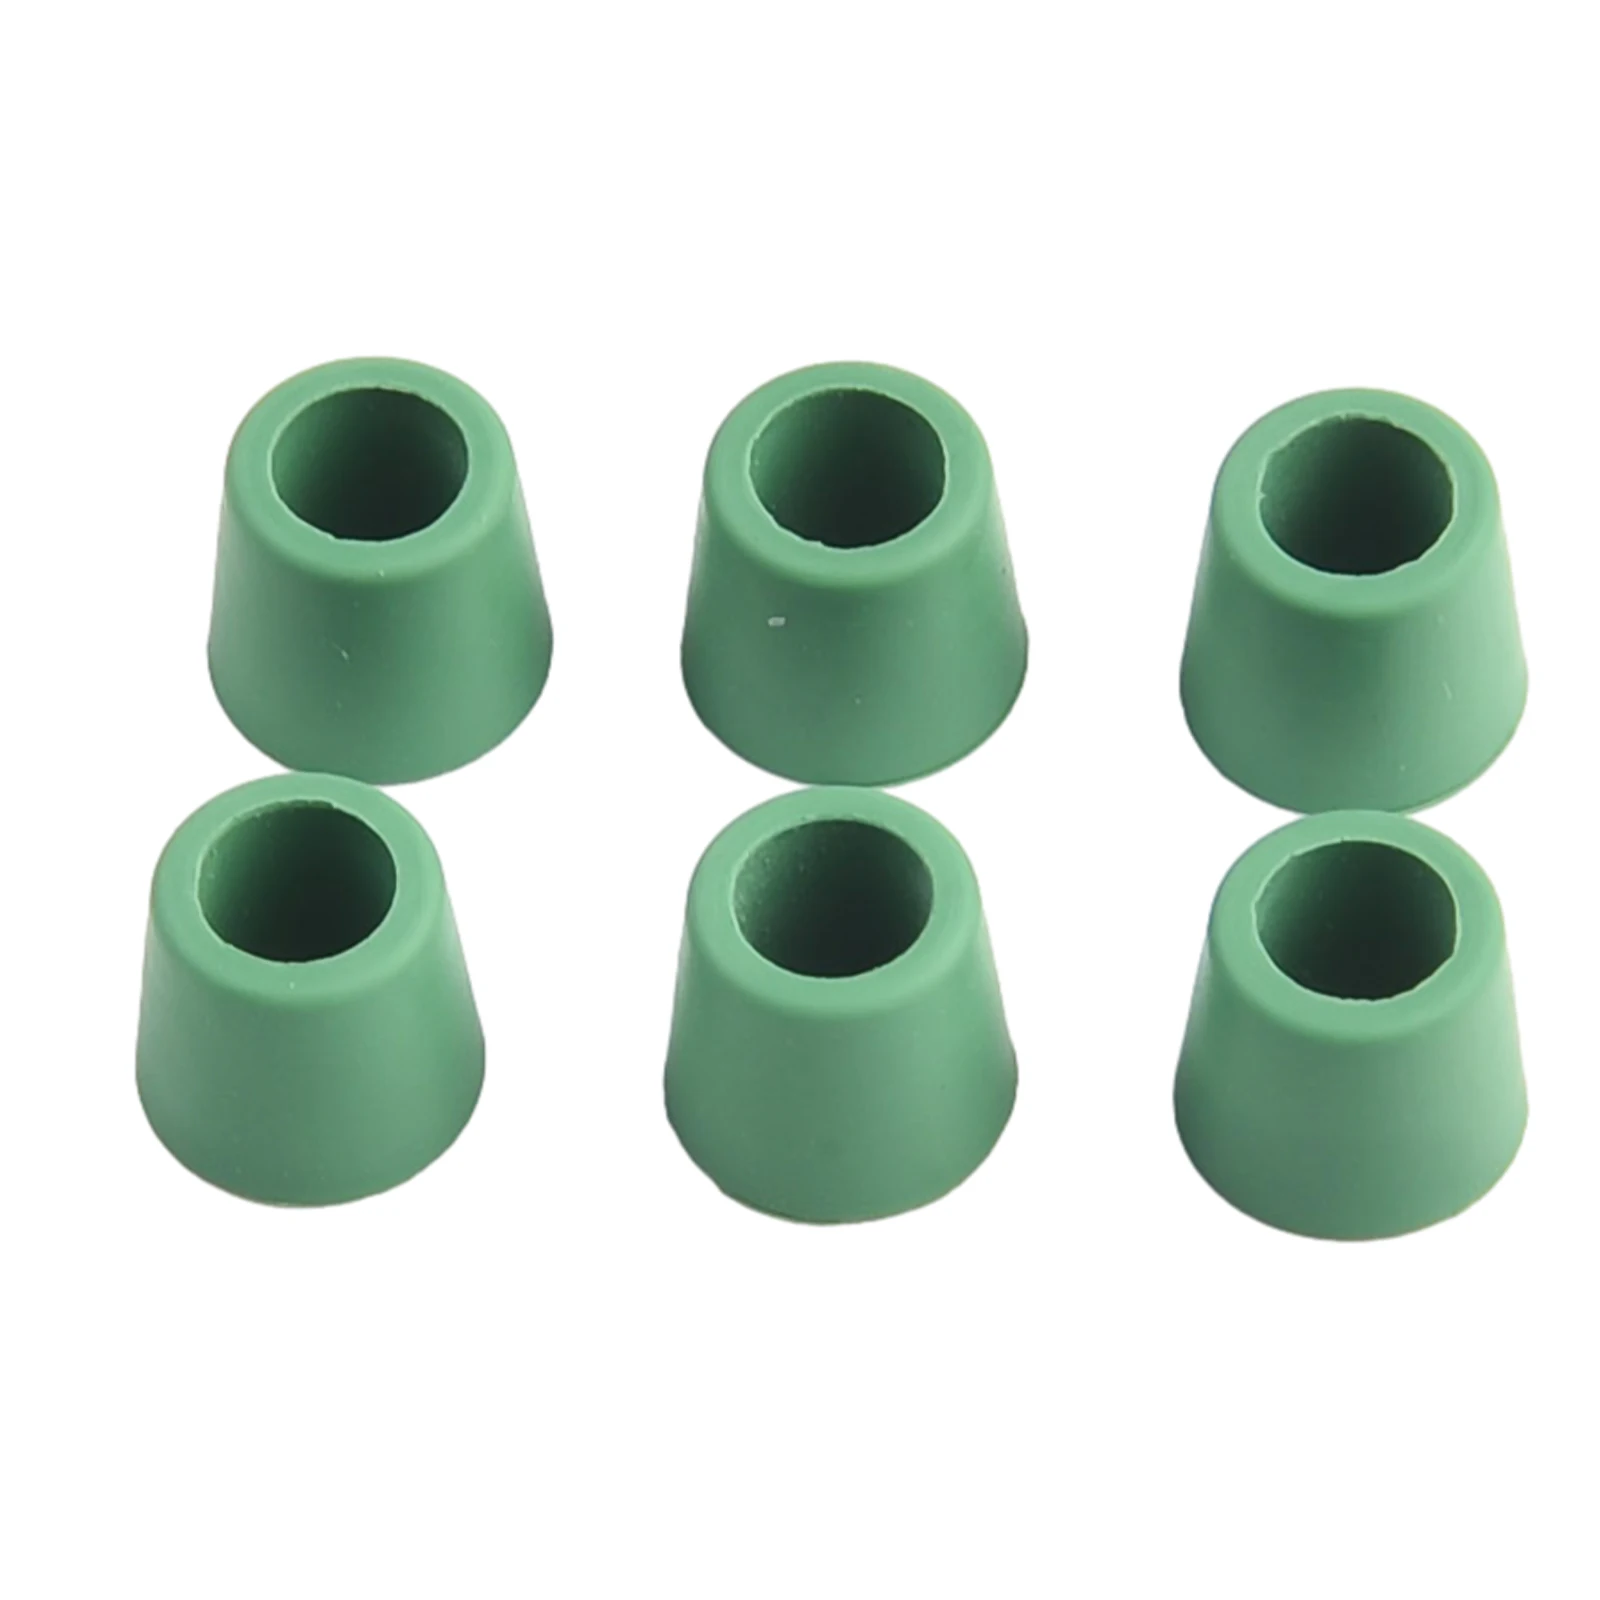 

50pcs Air Conditioning Rubber Sealing O-ring A/C 1/4 Charging Hose Valve Gasket Green Rubber Electrical Equipment Installation